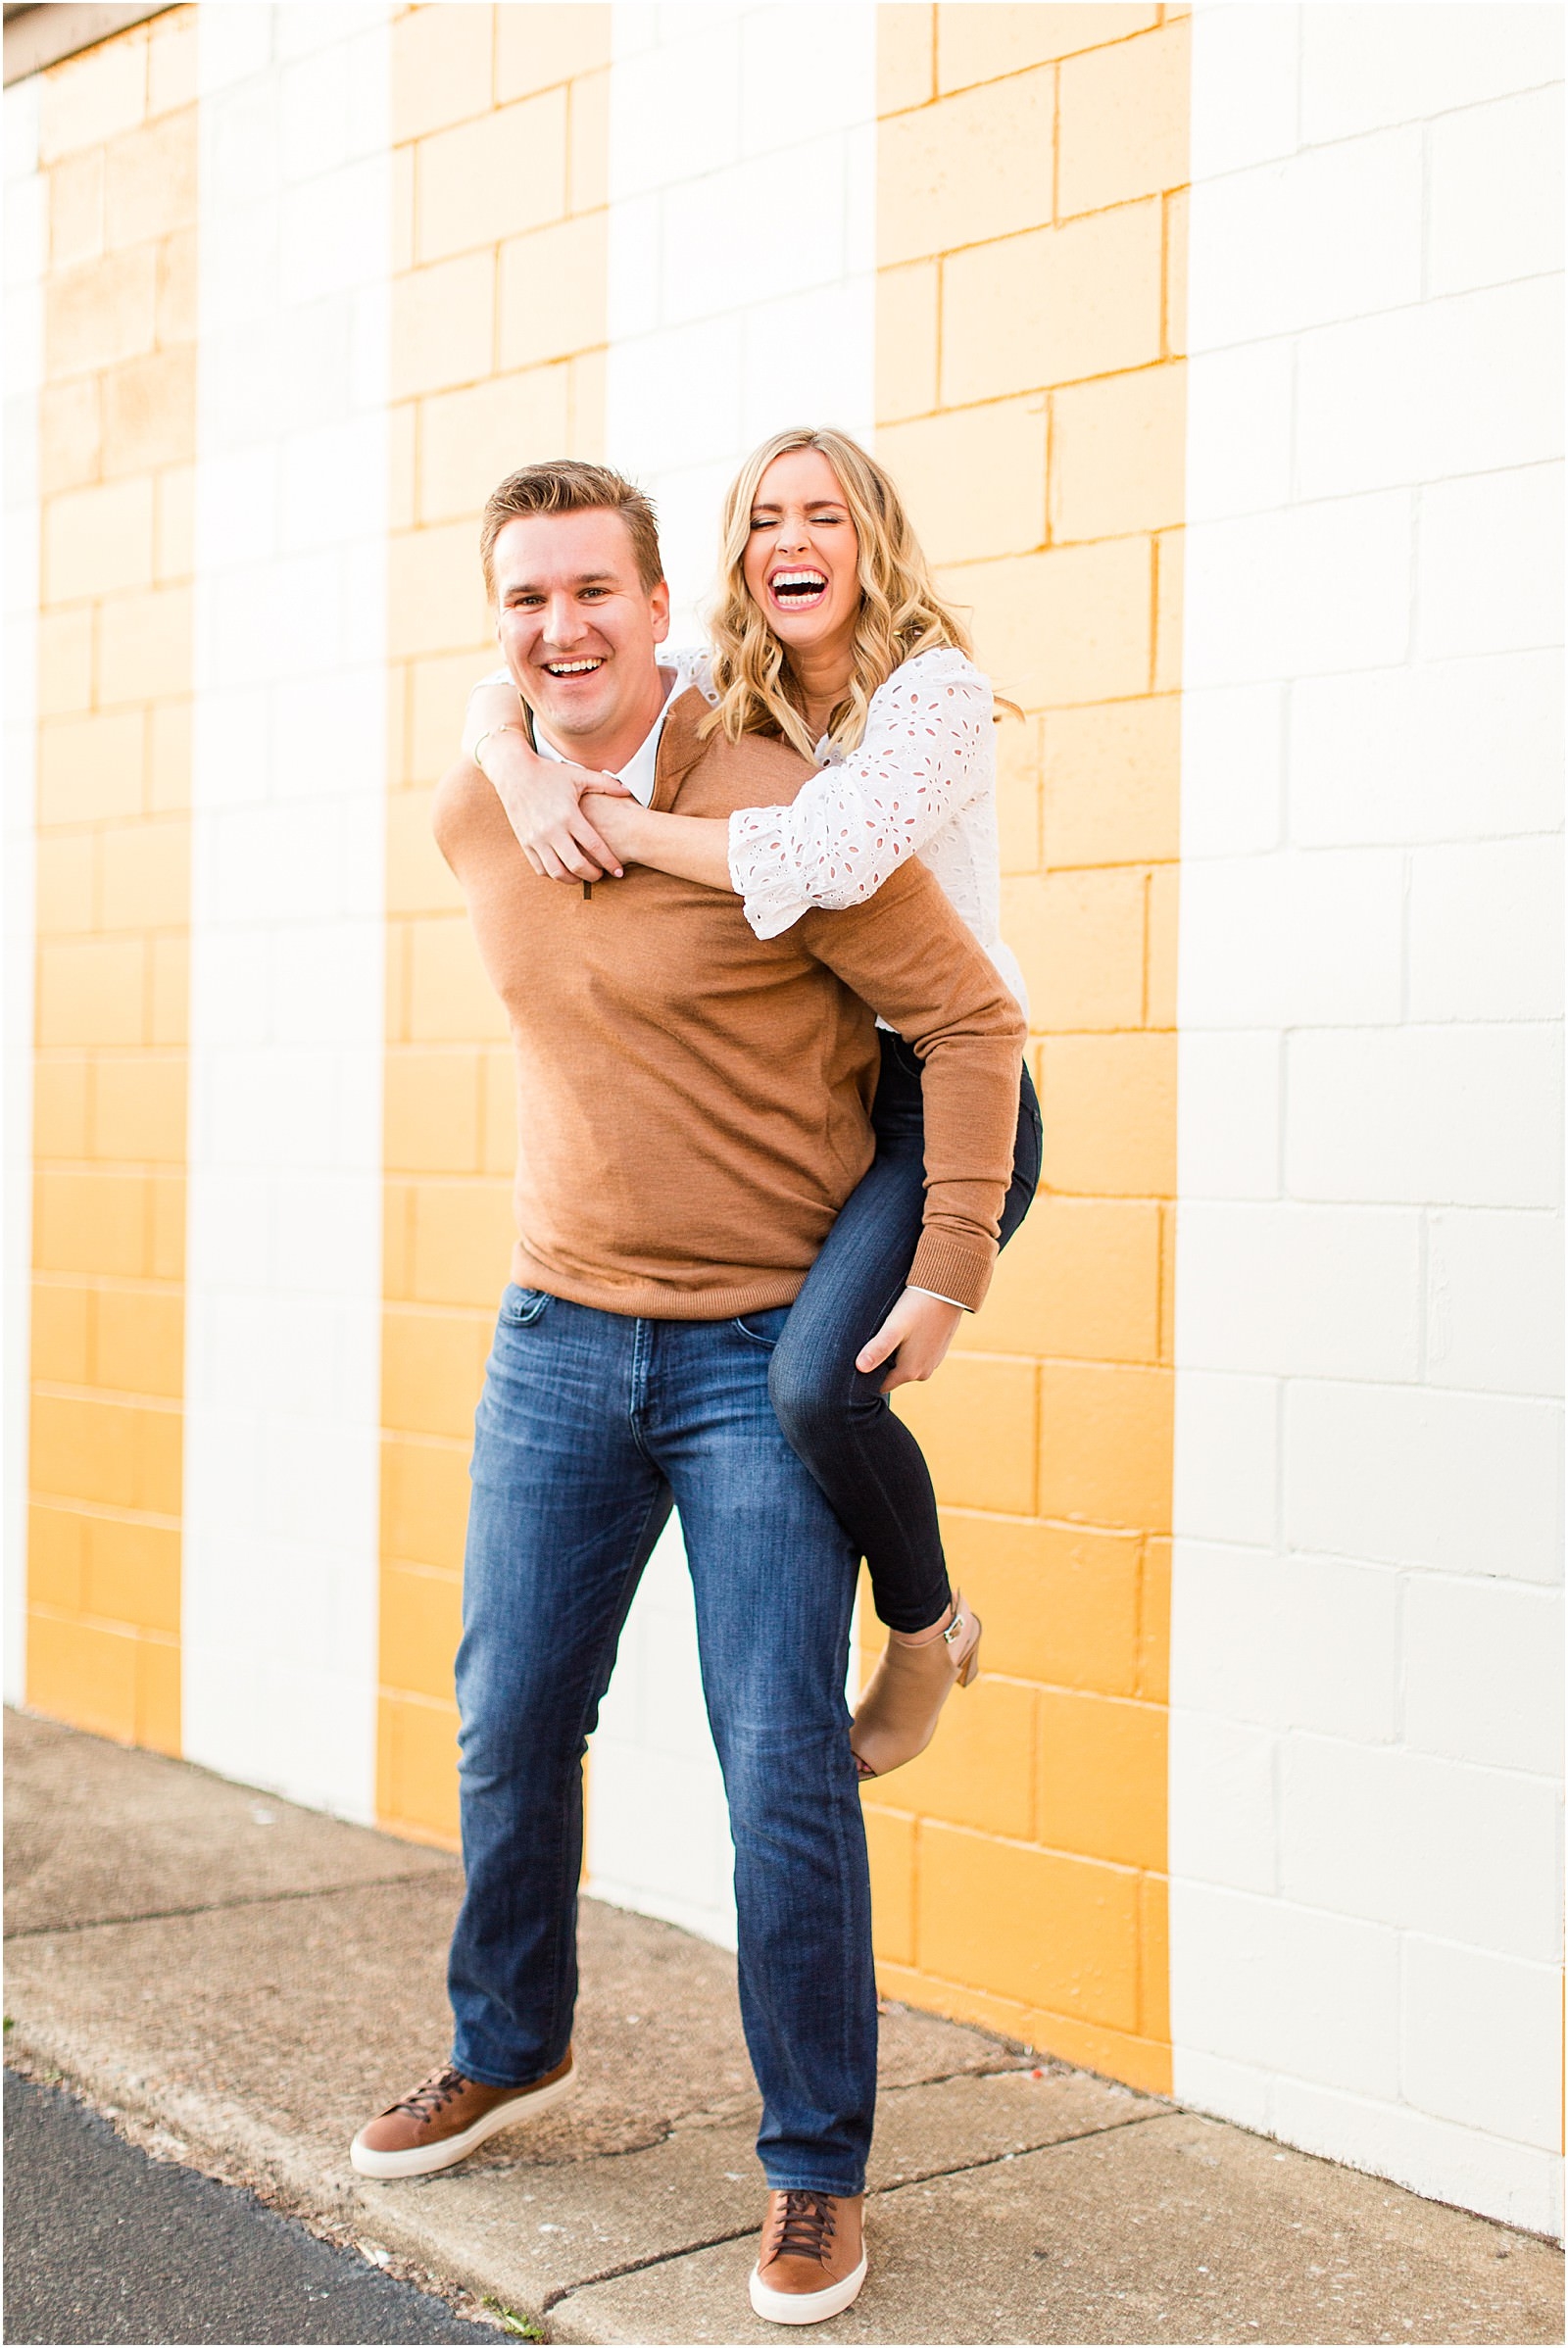 Madison and Christaan | A 20 West Engagement Session in Downto wn Newburgh | Bret and Brandie Photography039.jpg